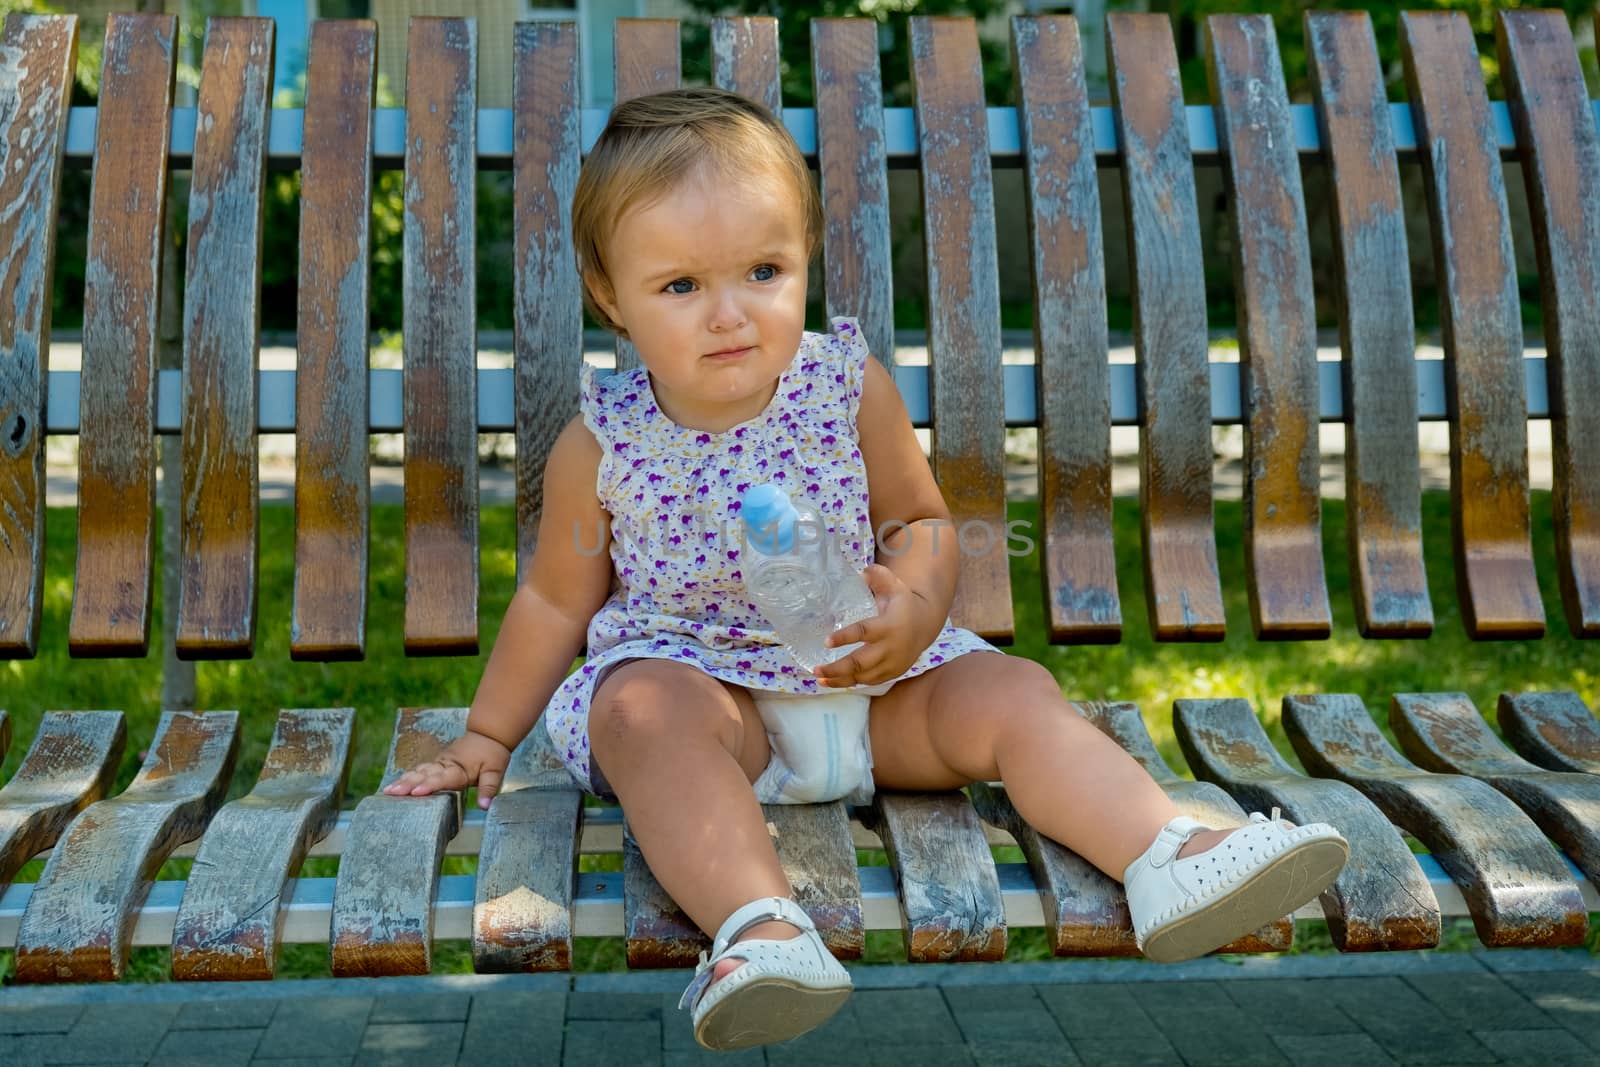 Little girl sits on a park bench with a bottle of water in her hands.